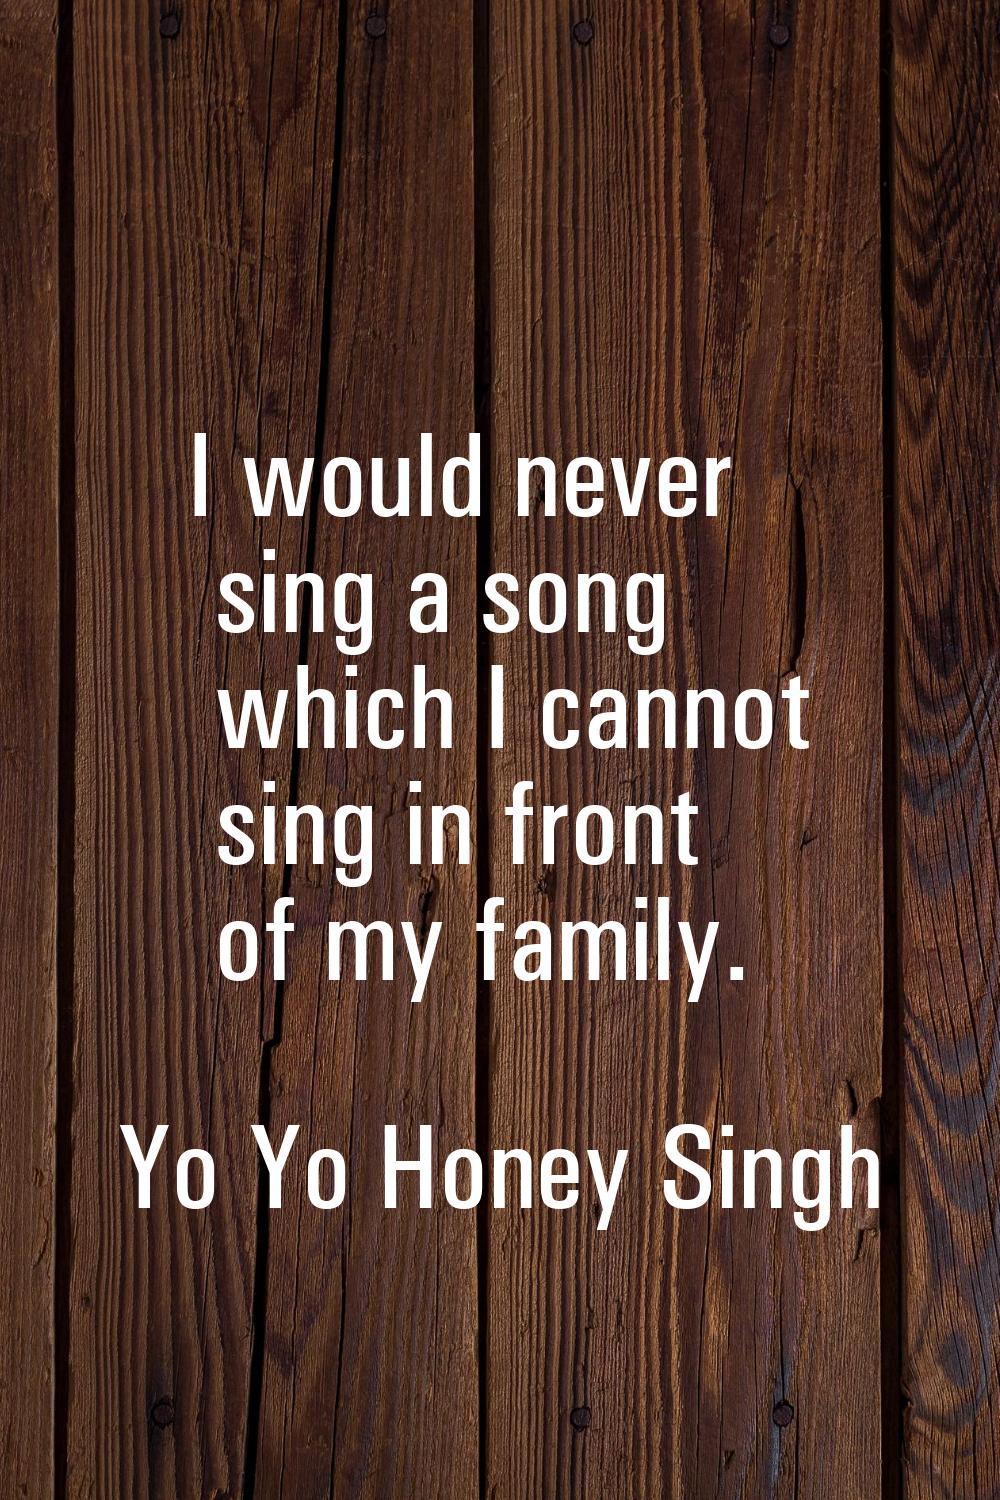 I would never sing a song which I cannot sing in front of my family.